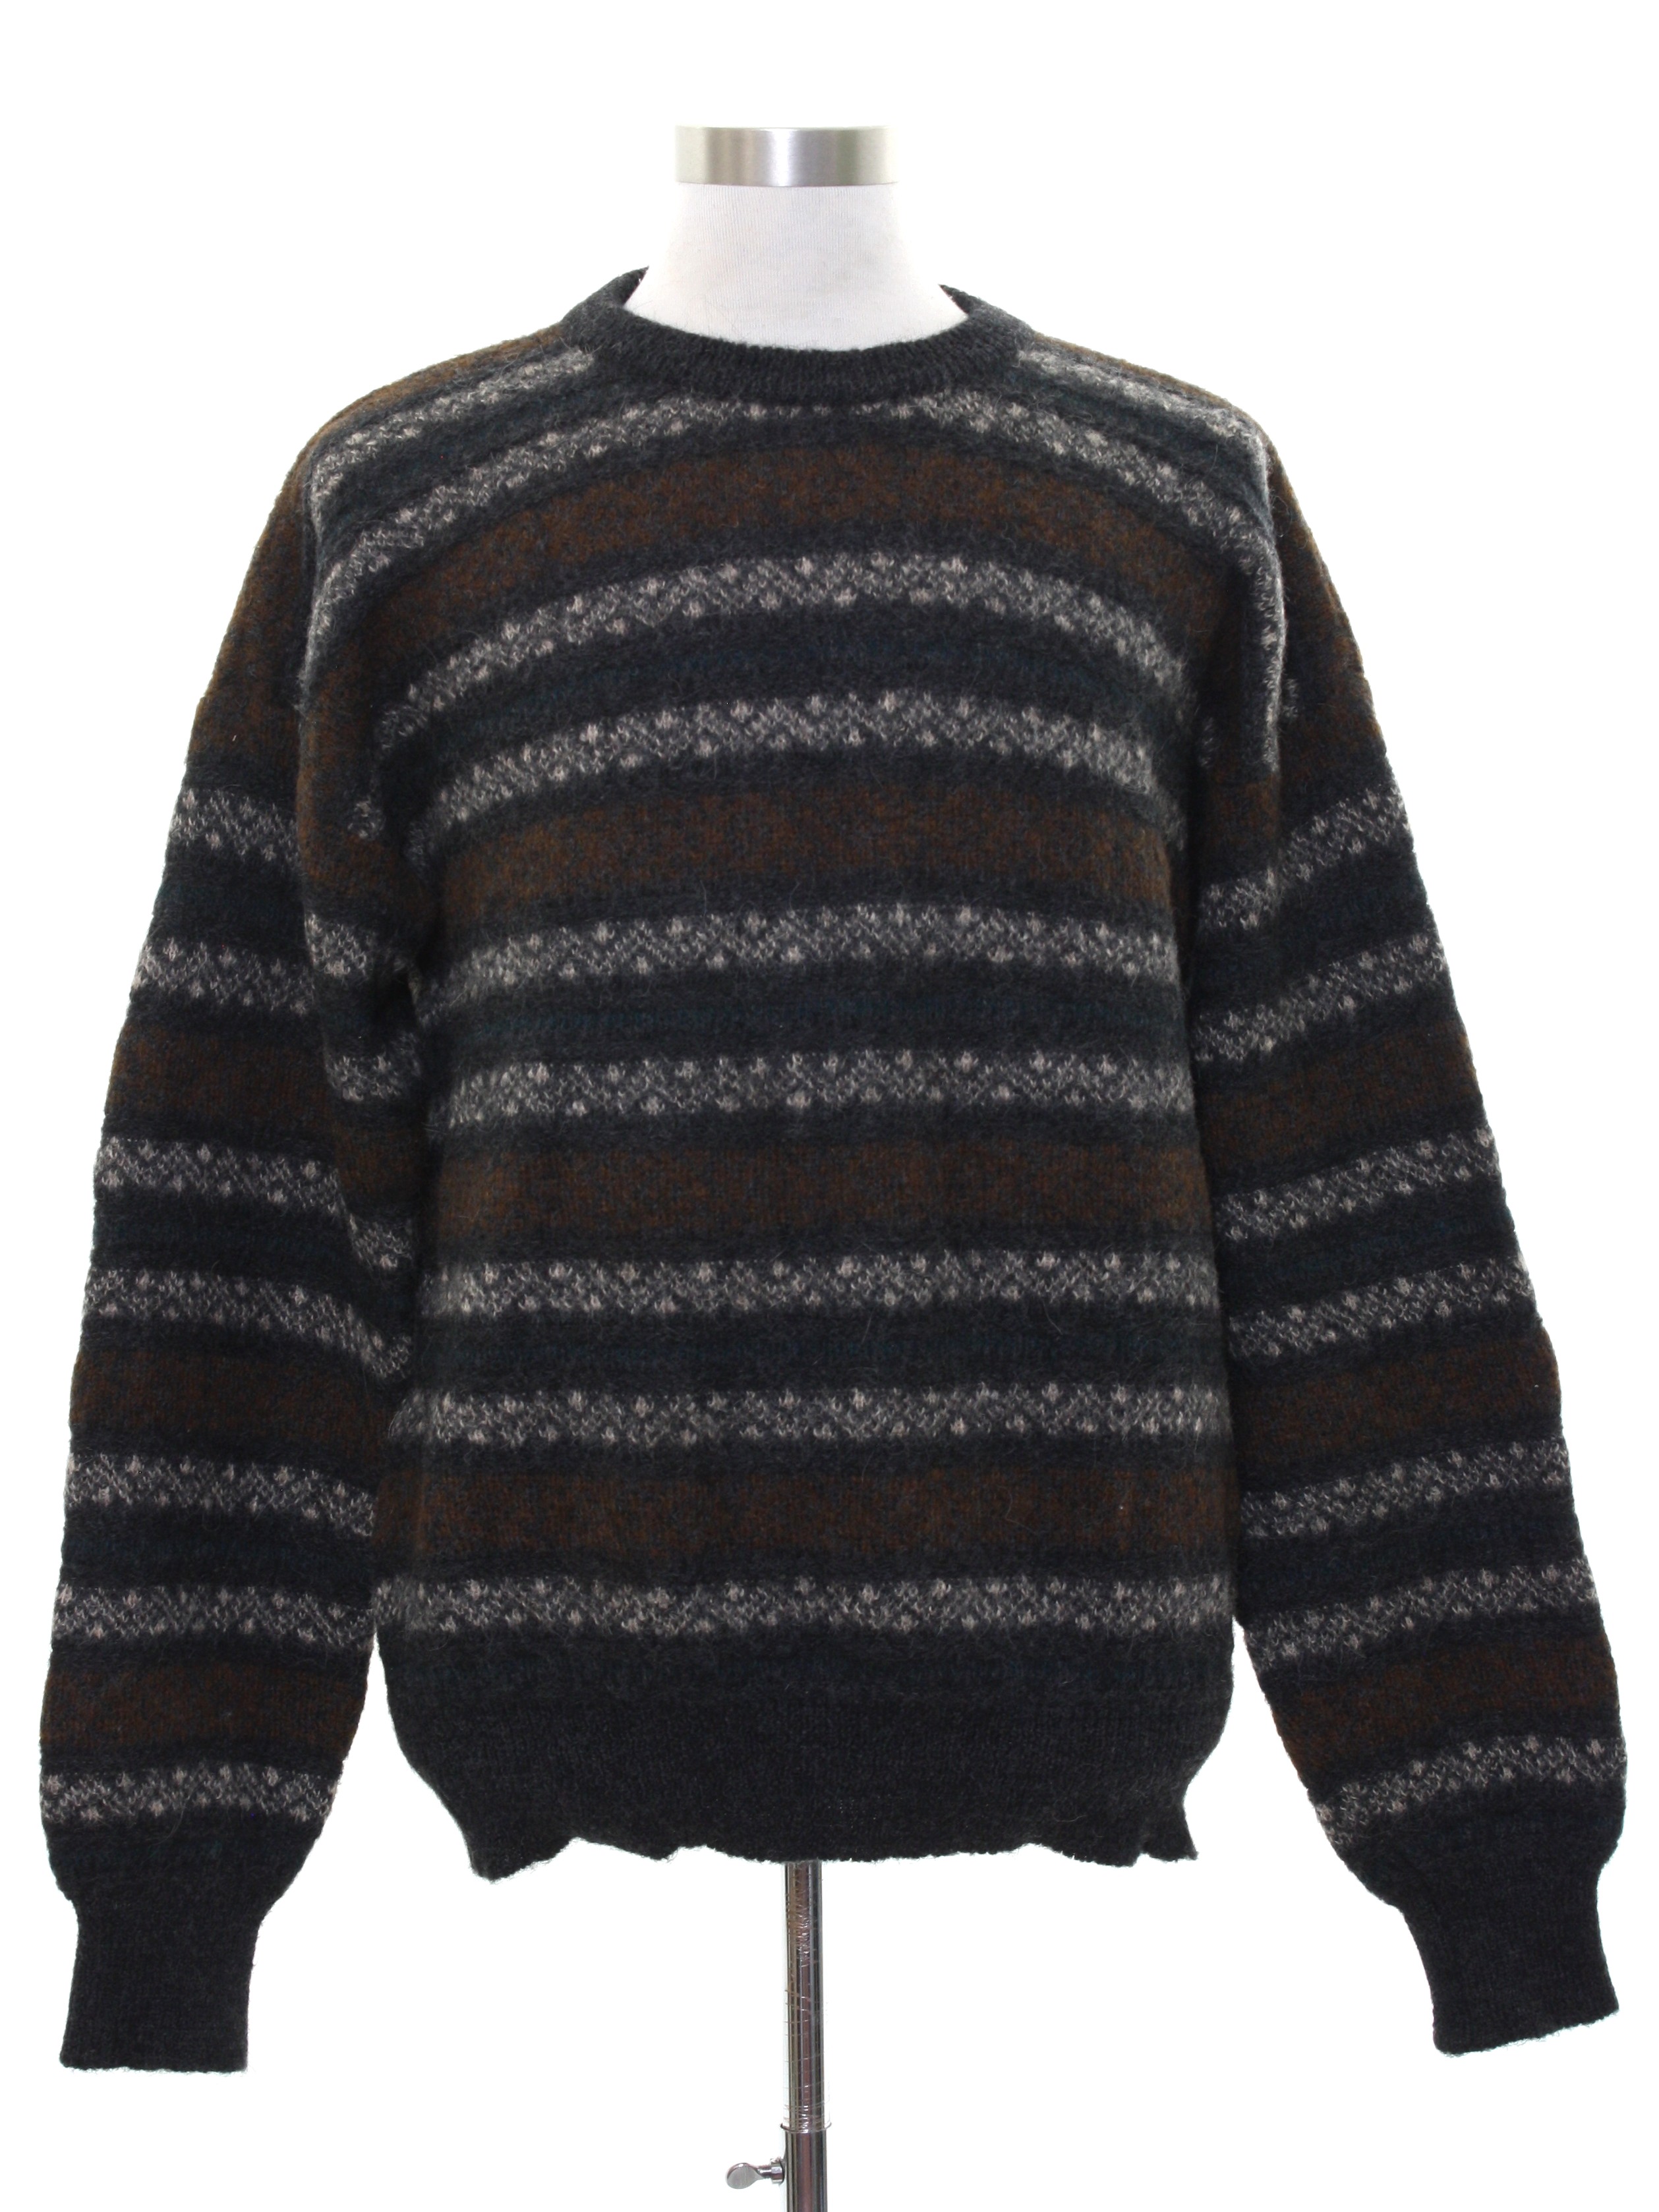 Vintage Top Knits 1980s Sweater: 80s -Top Knits- Mens charcoal background wool alpaca blend ...